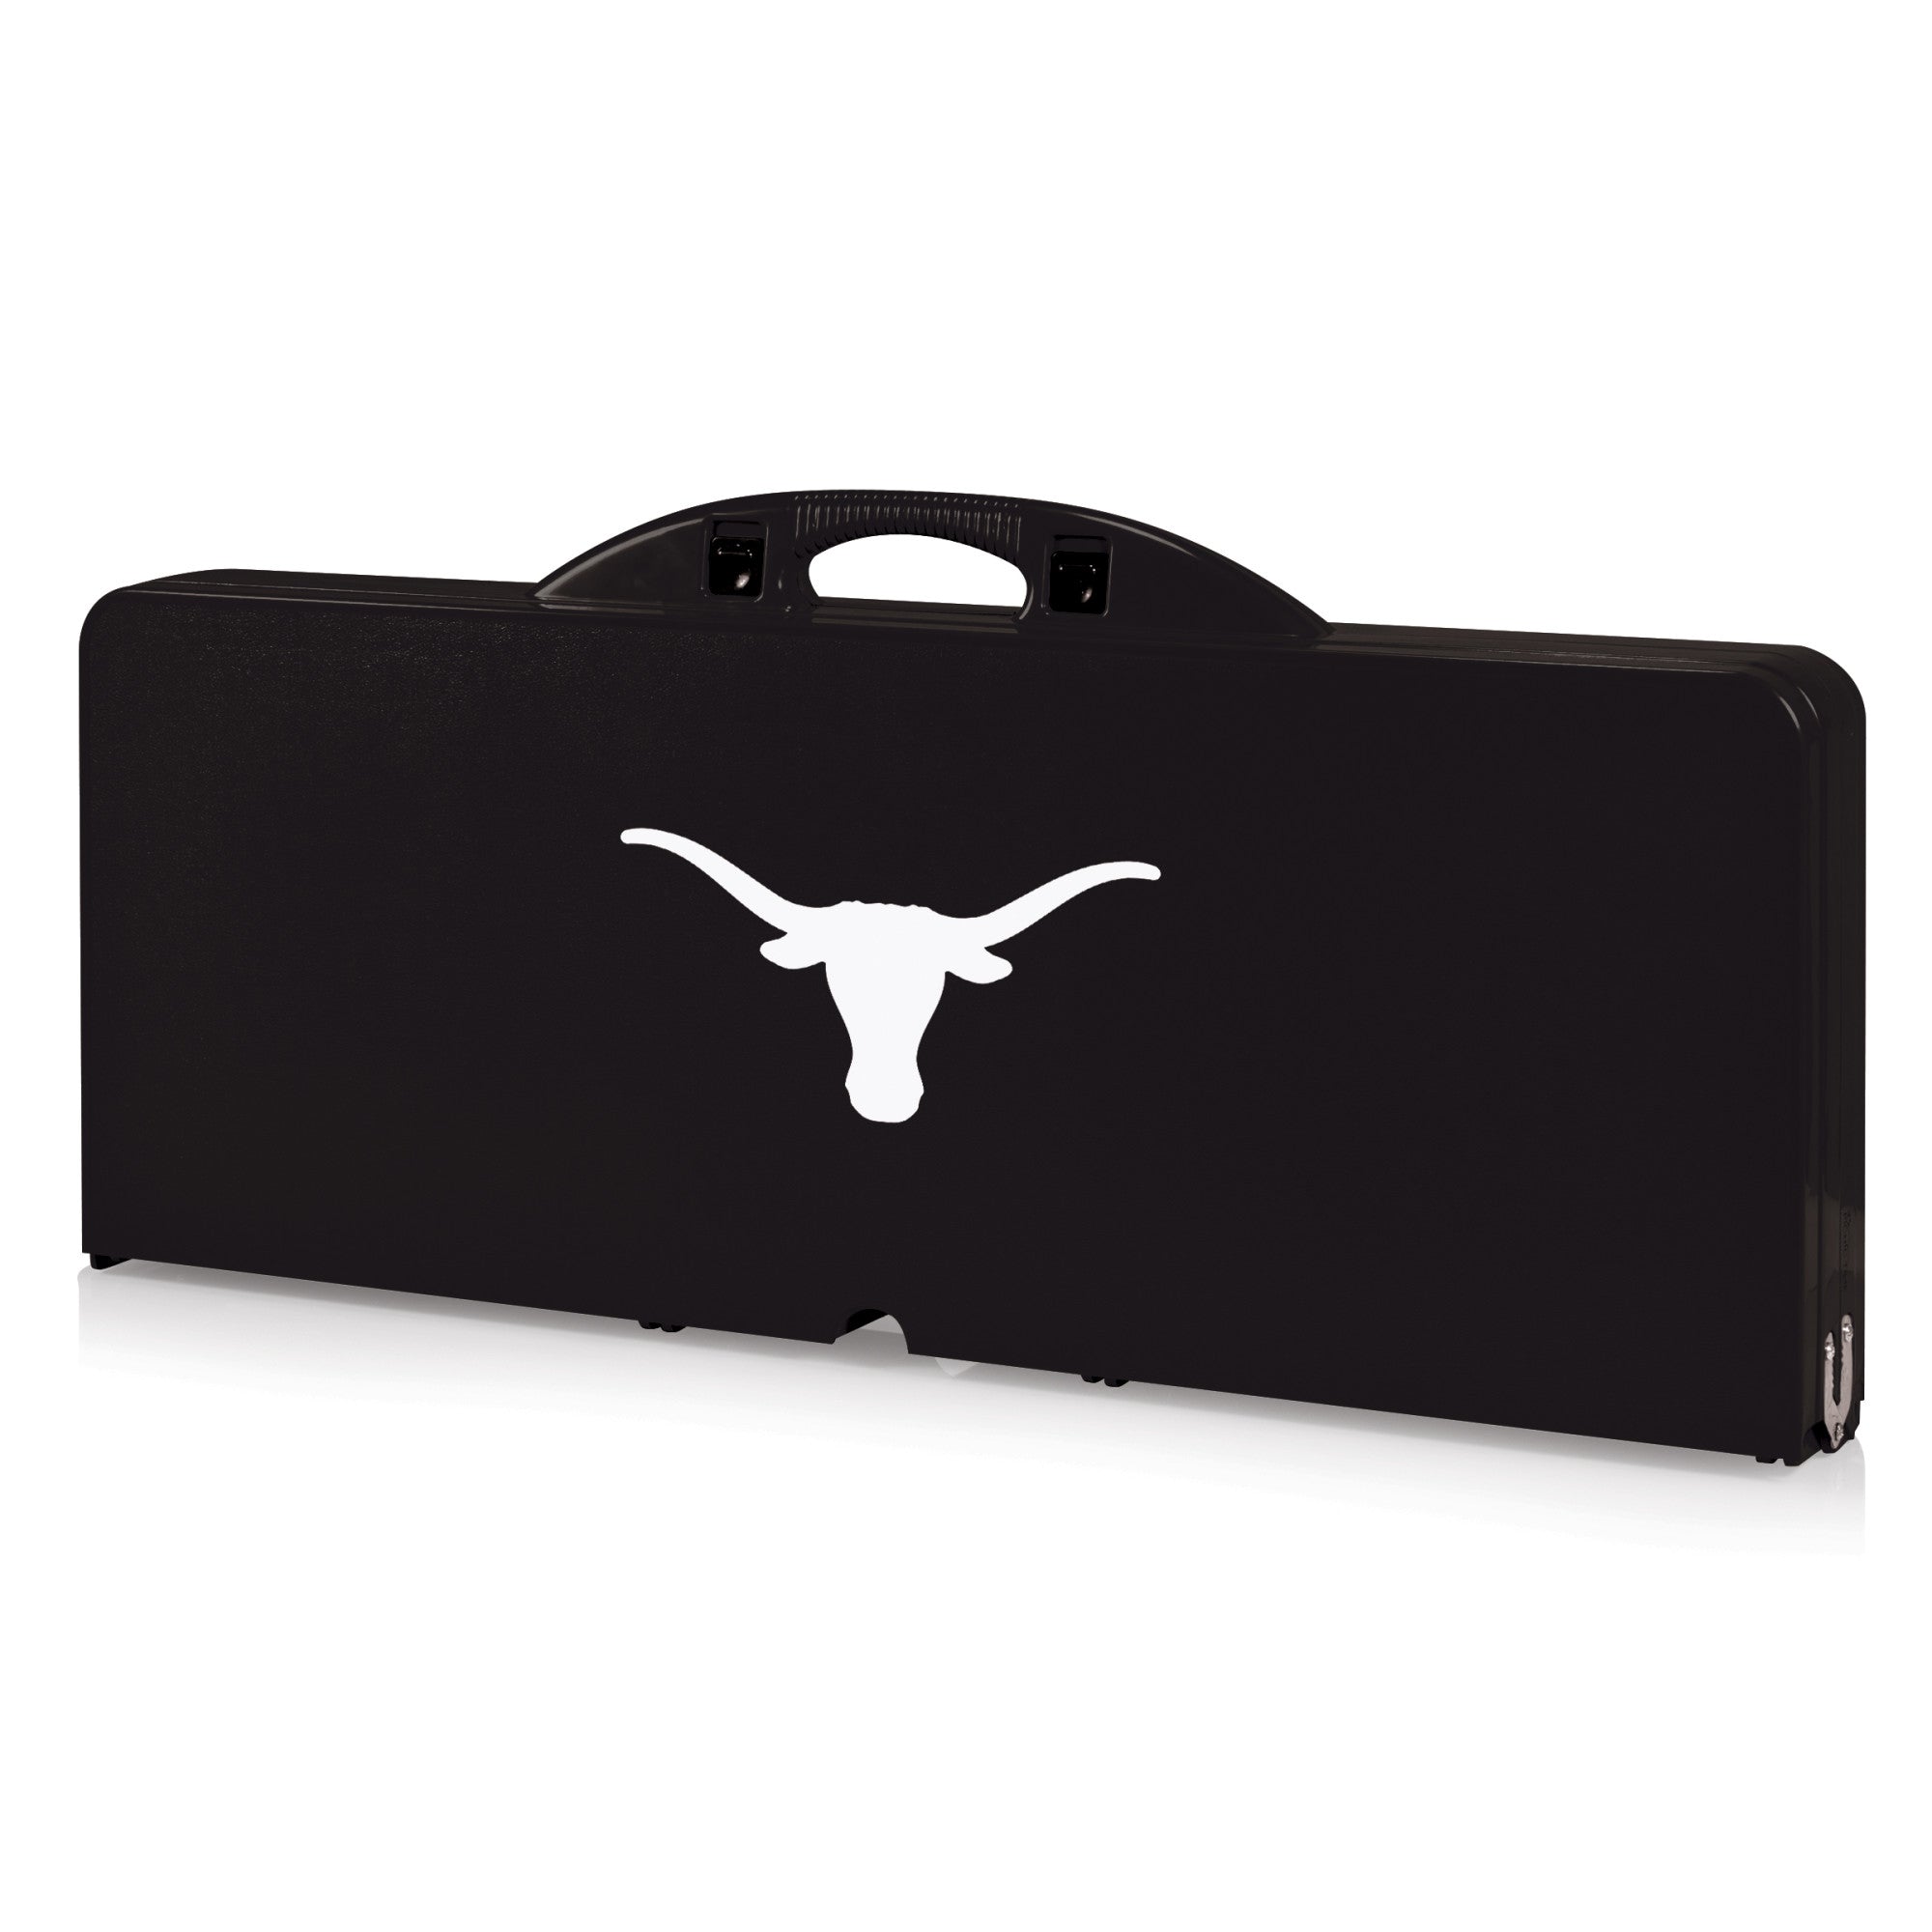 Texas Longhorns - Picnic Table Portable Folding Table with Seats